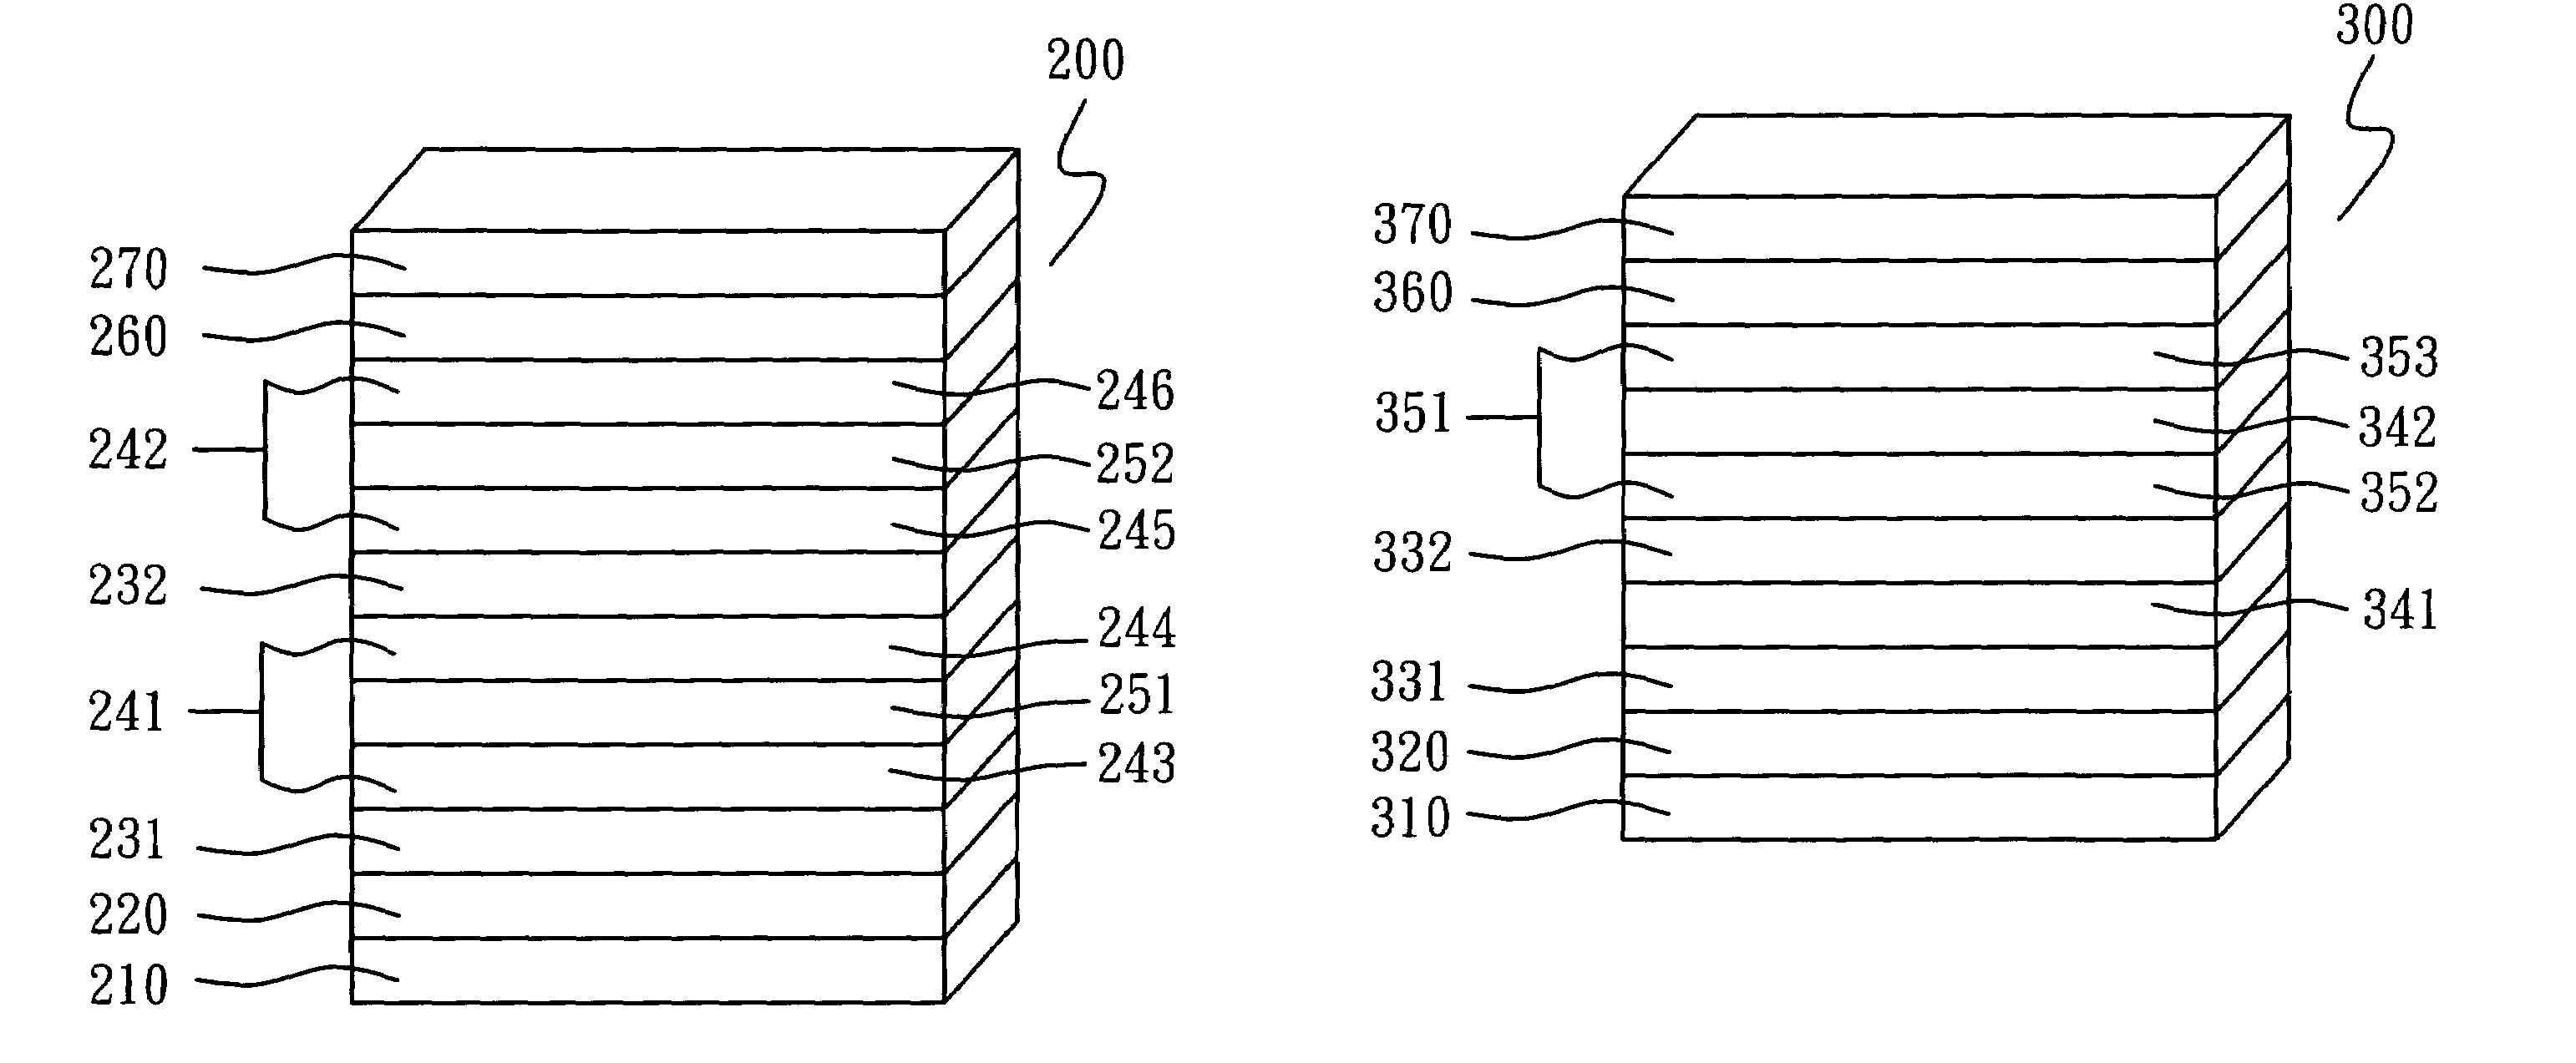 Magnetic tunneling junction structure for magnetic random access memory